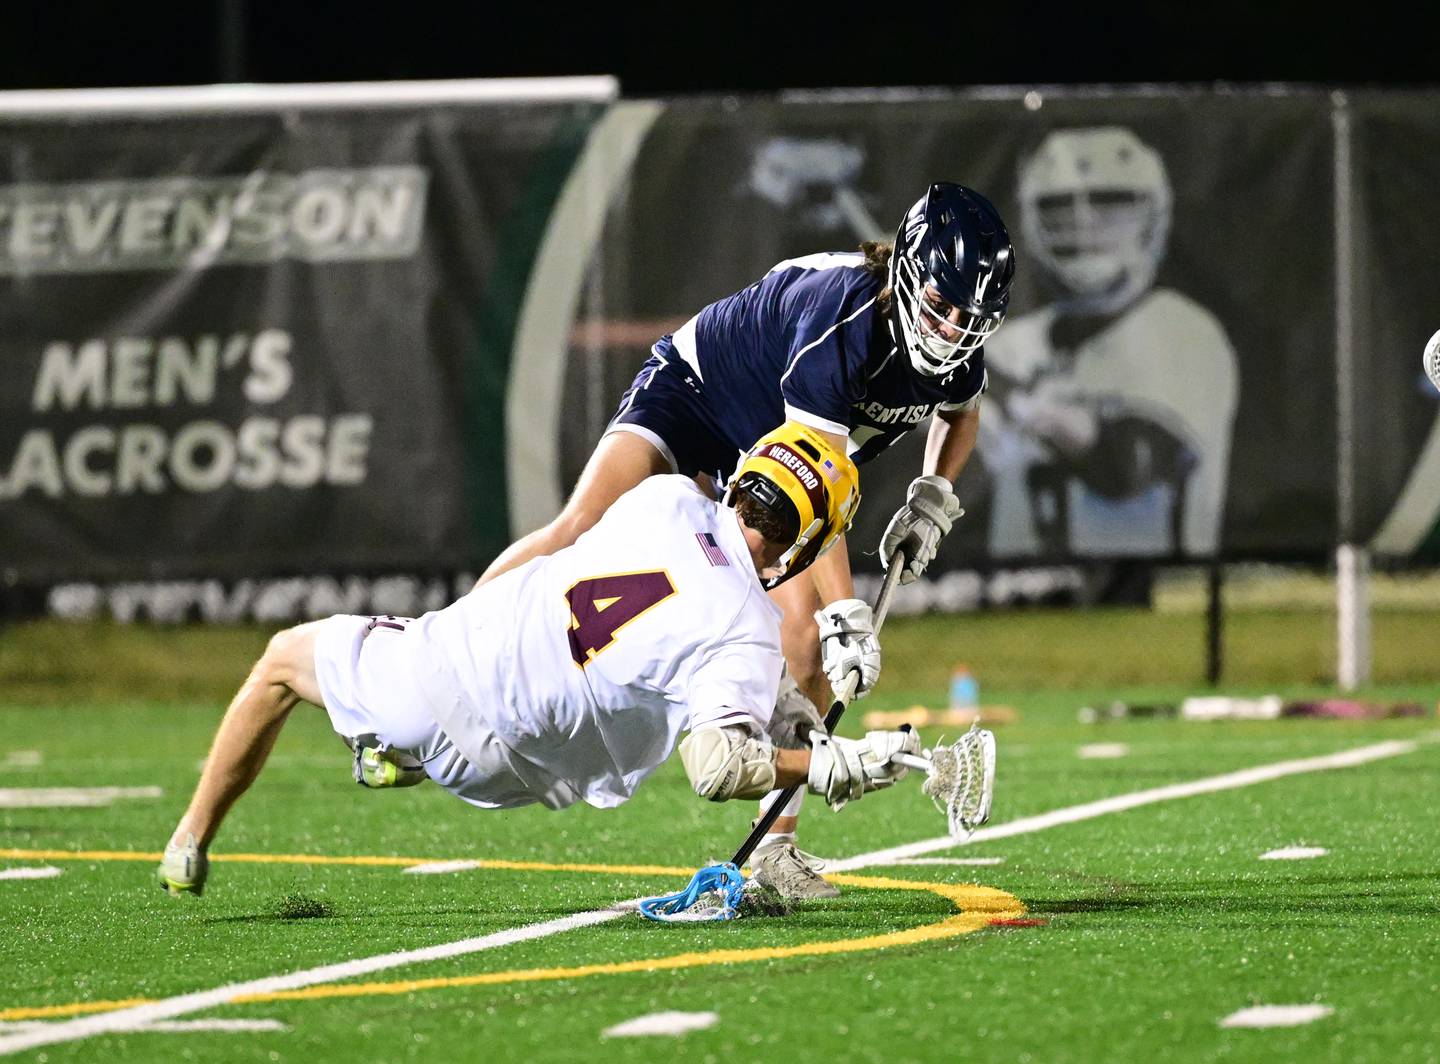 Kent Island defender Henry Gavin (top) thwarts a shot attempt by Hereford's Connor Hartlove as the Buccaneers limited the Bulls to just three goals in winning the 2023 Class 2A Boys Lacrosse state championship, Tuesday night at Stevenson University.